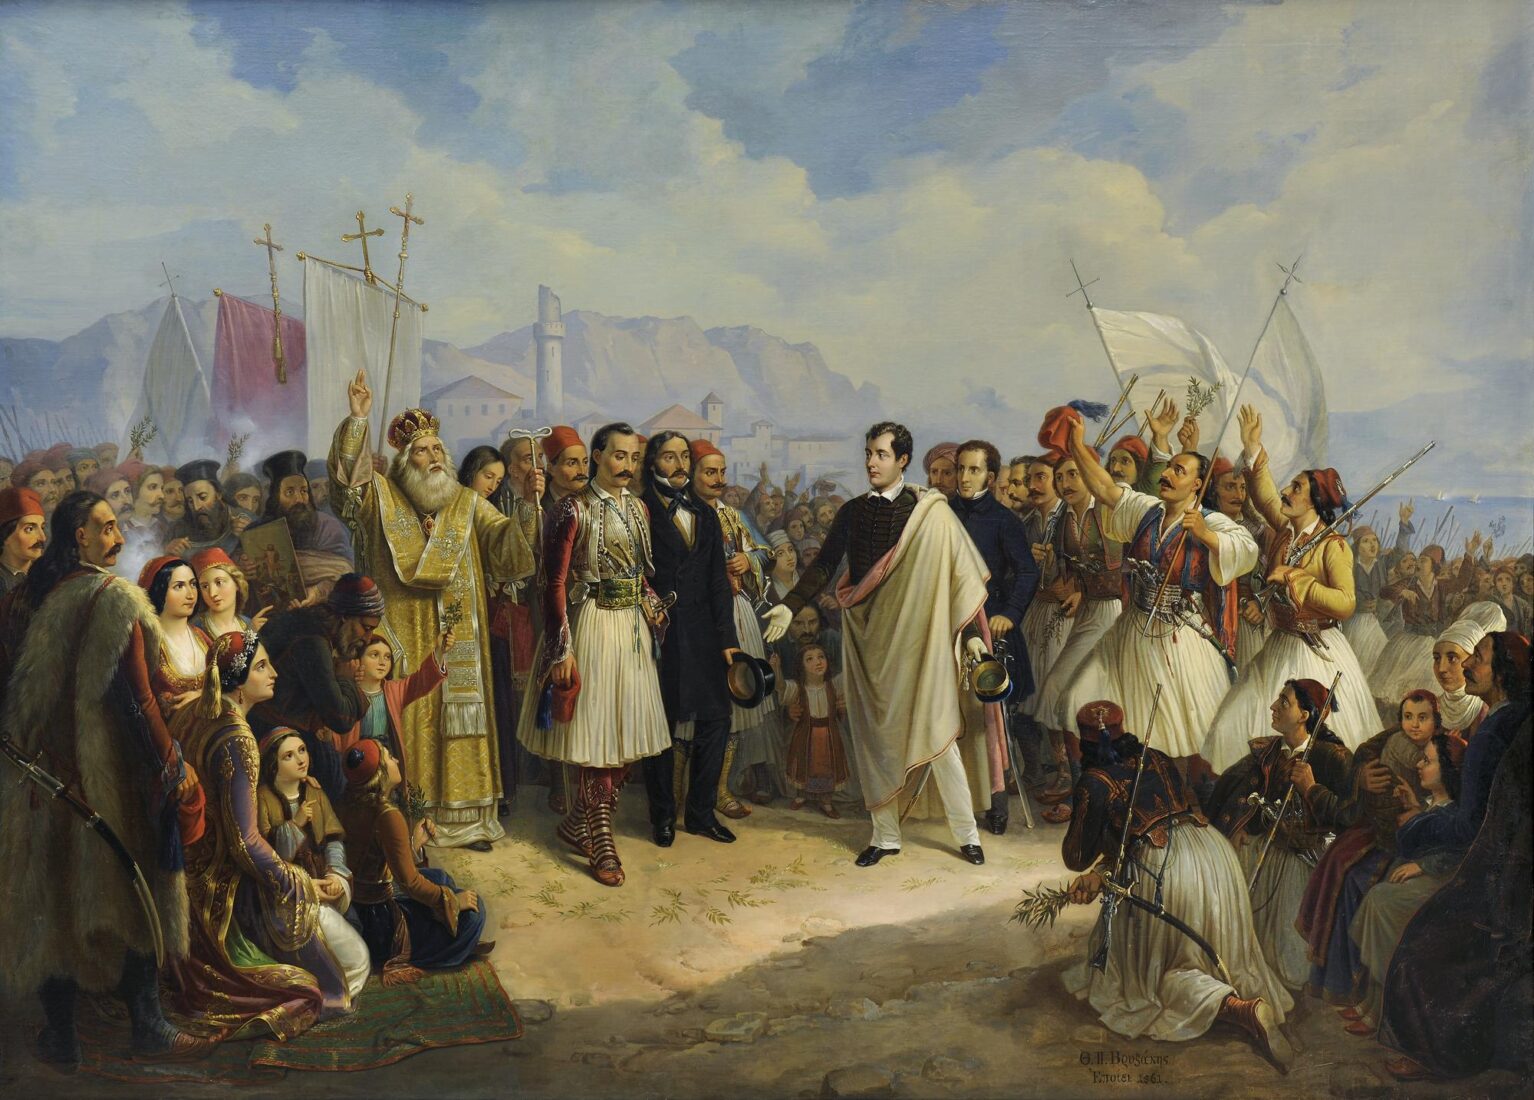 The Reception of Lord Byron at Missolonghi